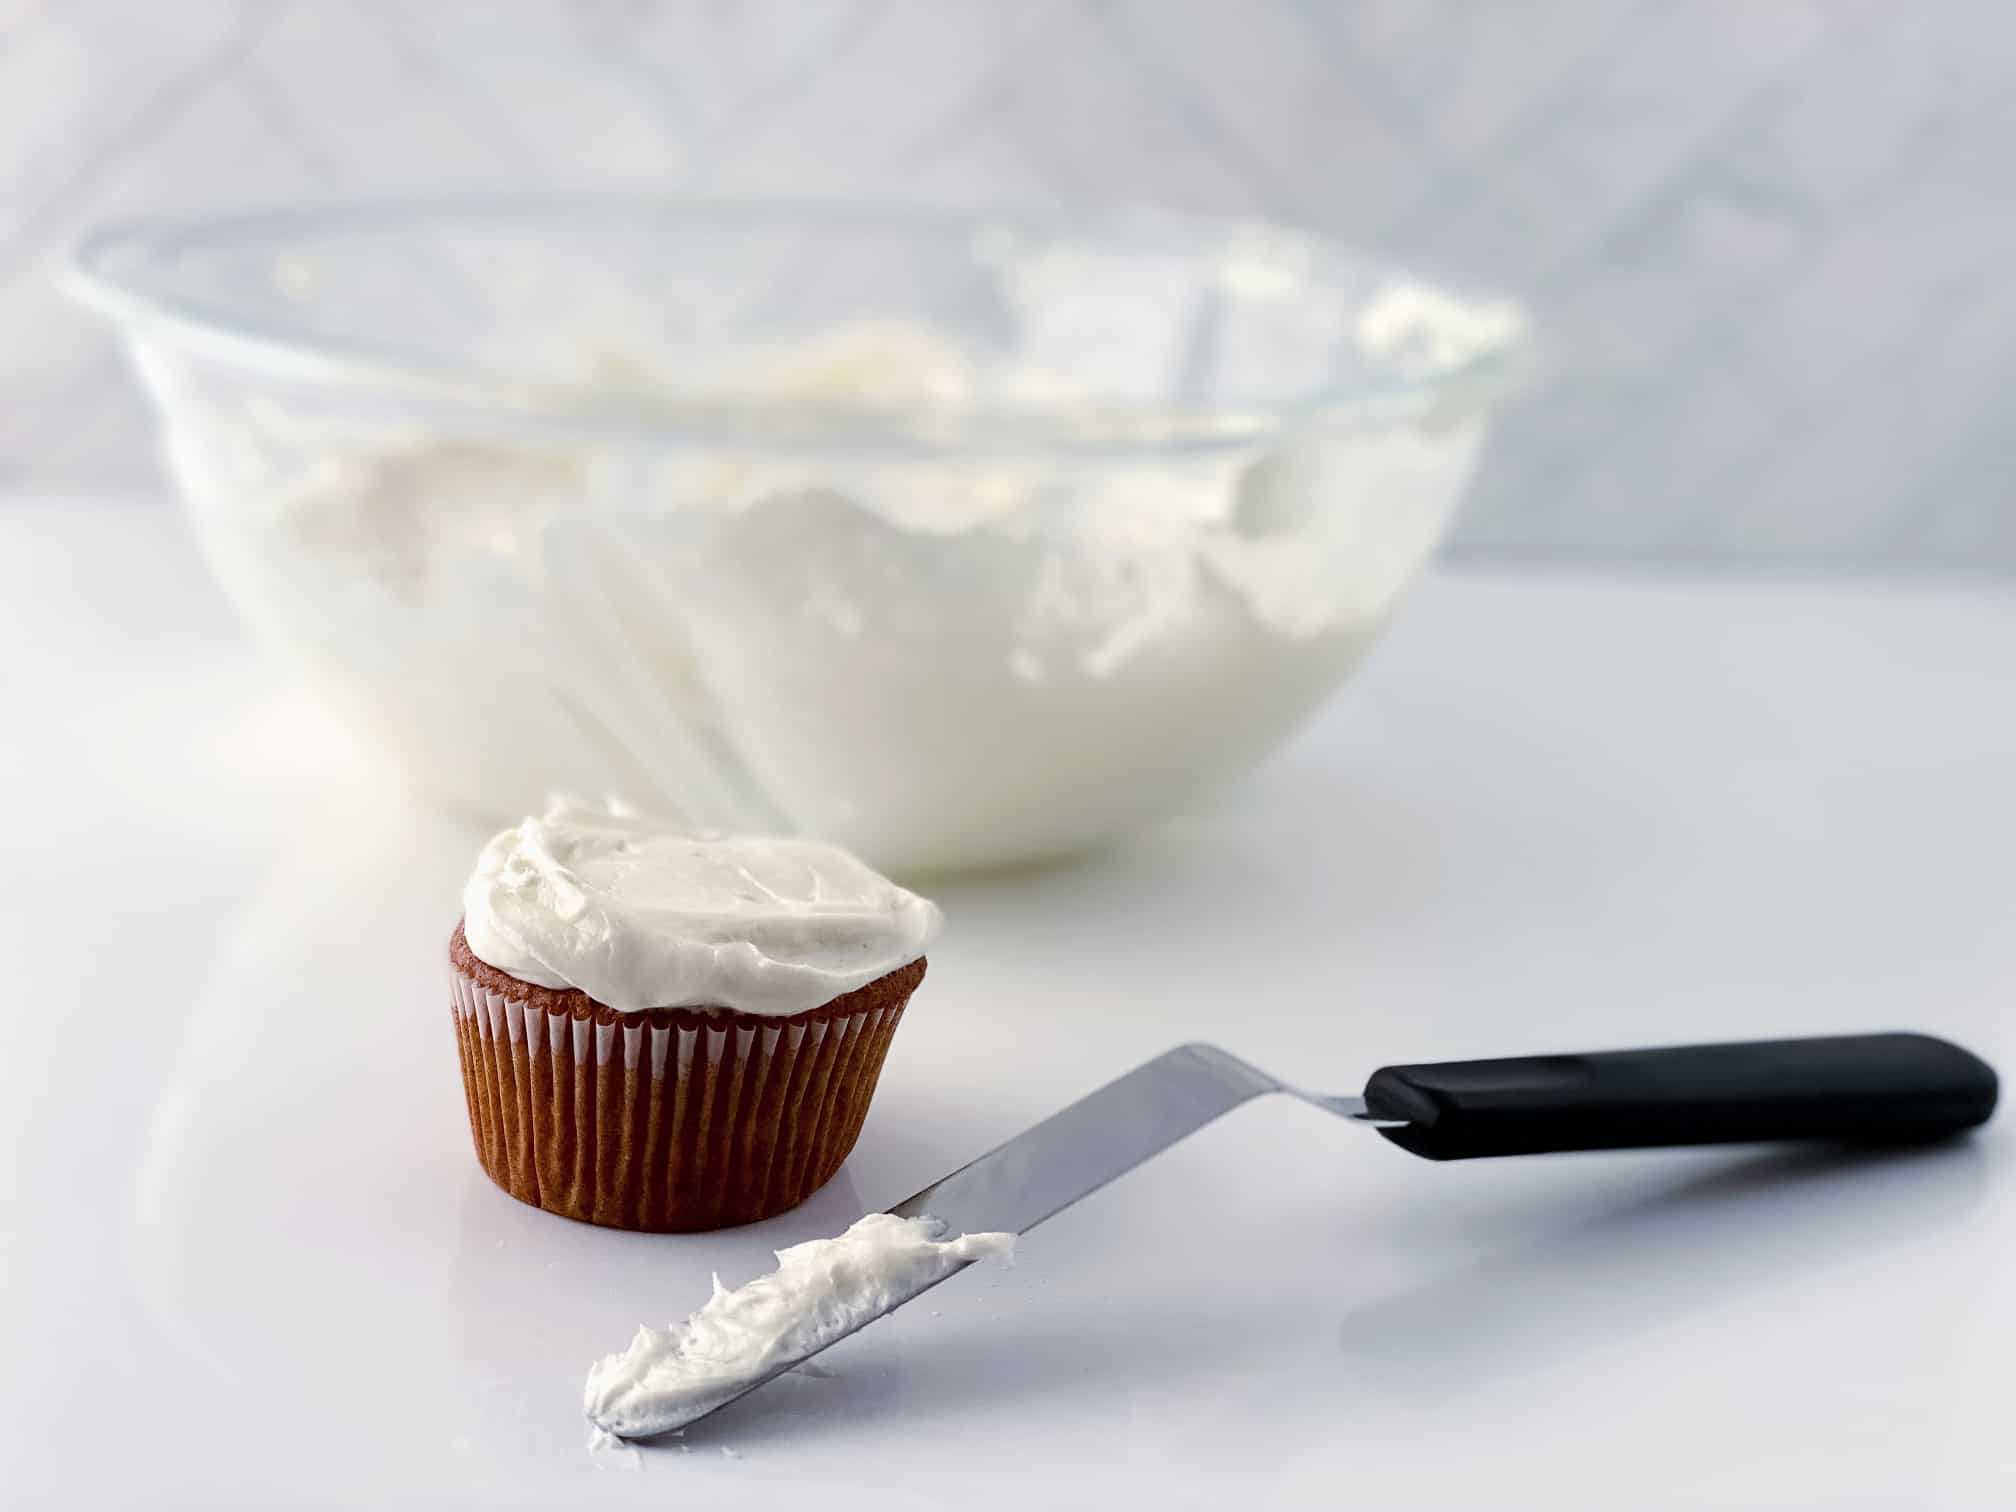 Spreading Cream Cheese Frosting on a Cupcake